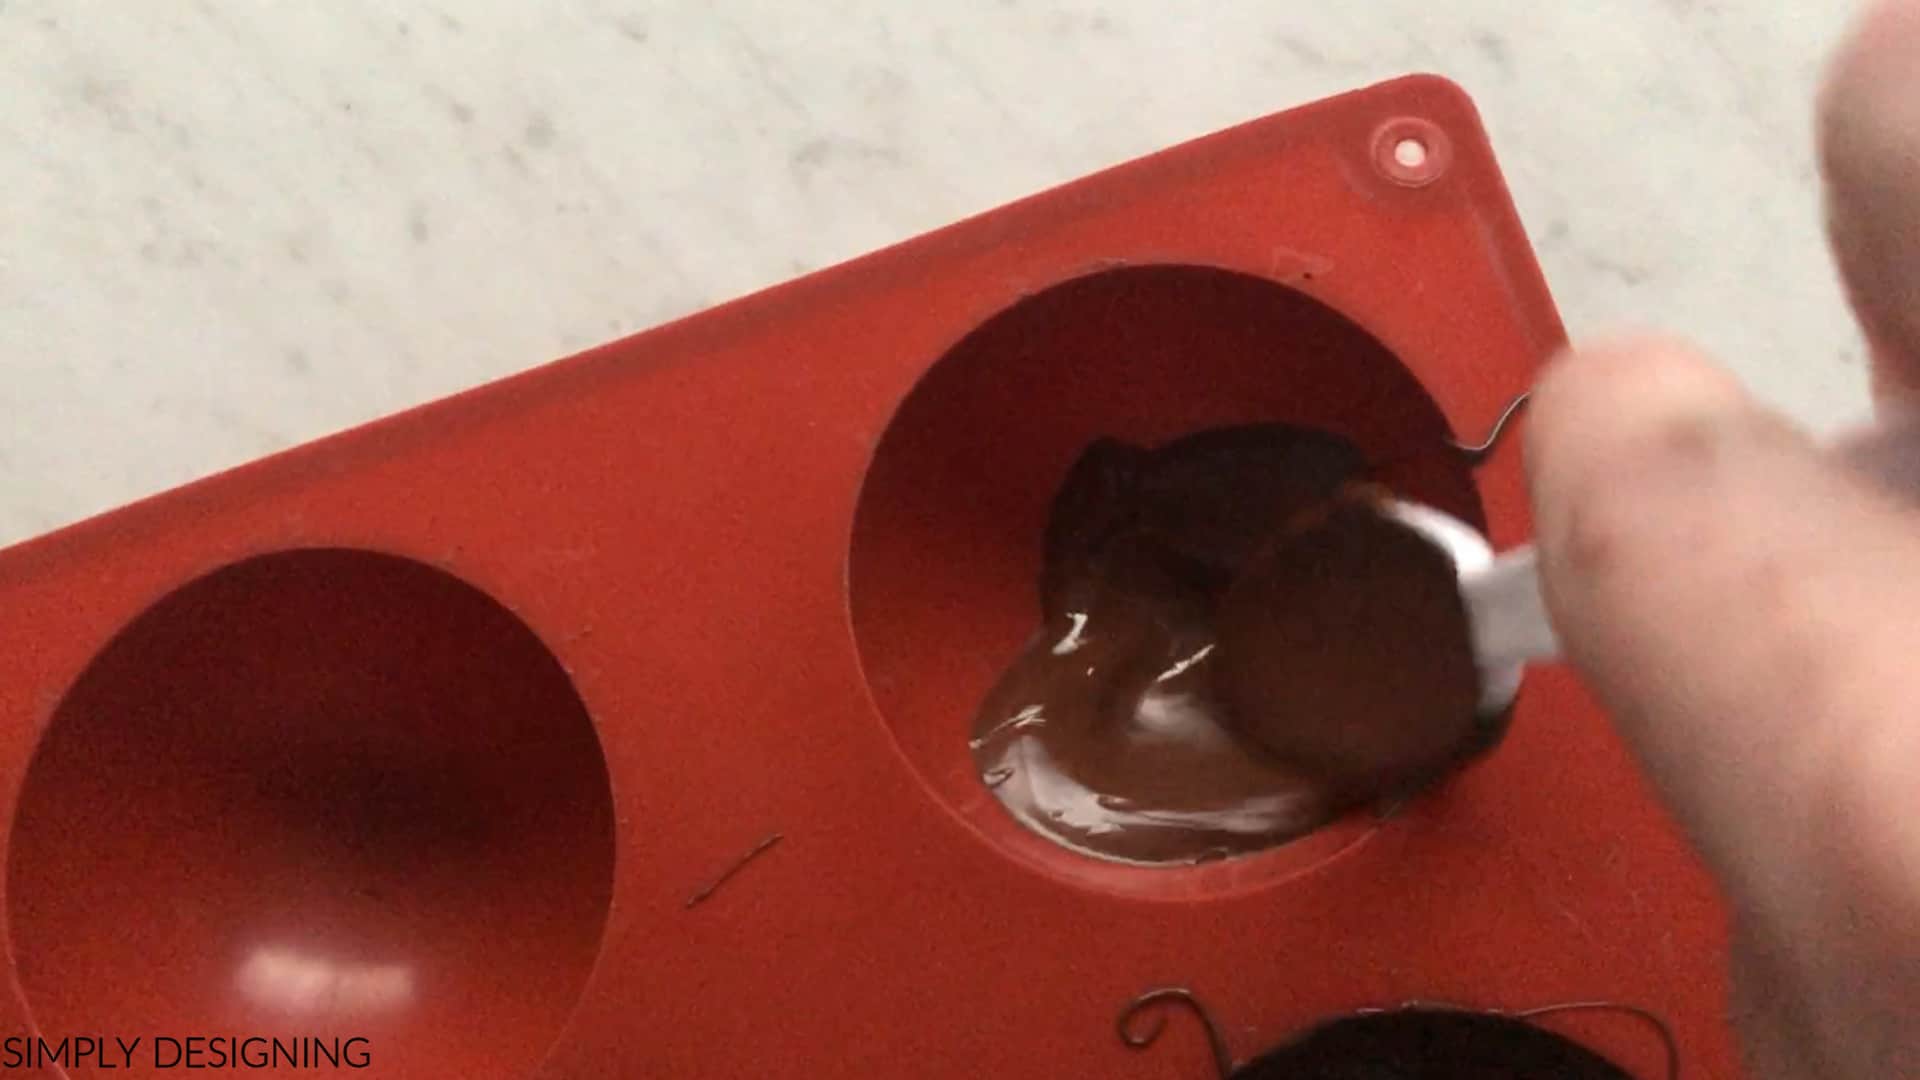 spread melted chocolate in silicone sphere mold for hot cocoa bombs